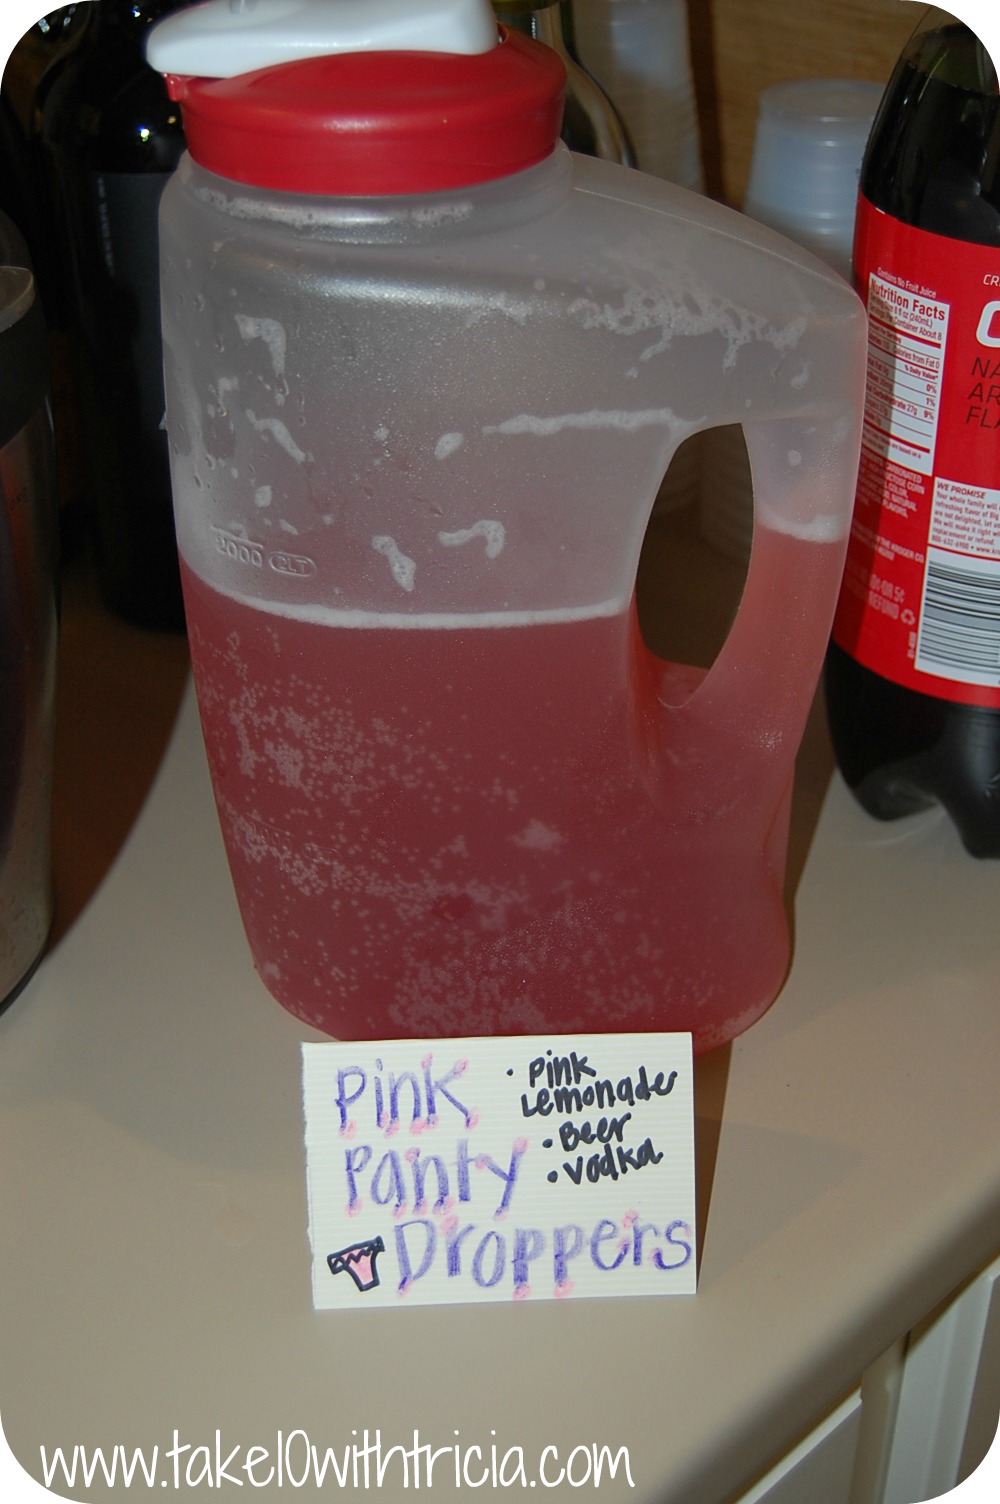 anne mcmichael recommends pink pantie pulldown recipe pic